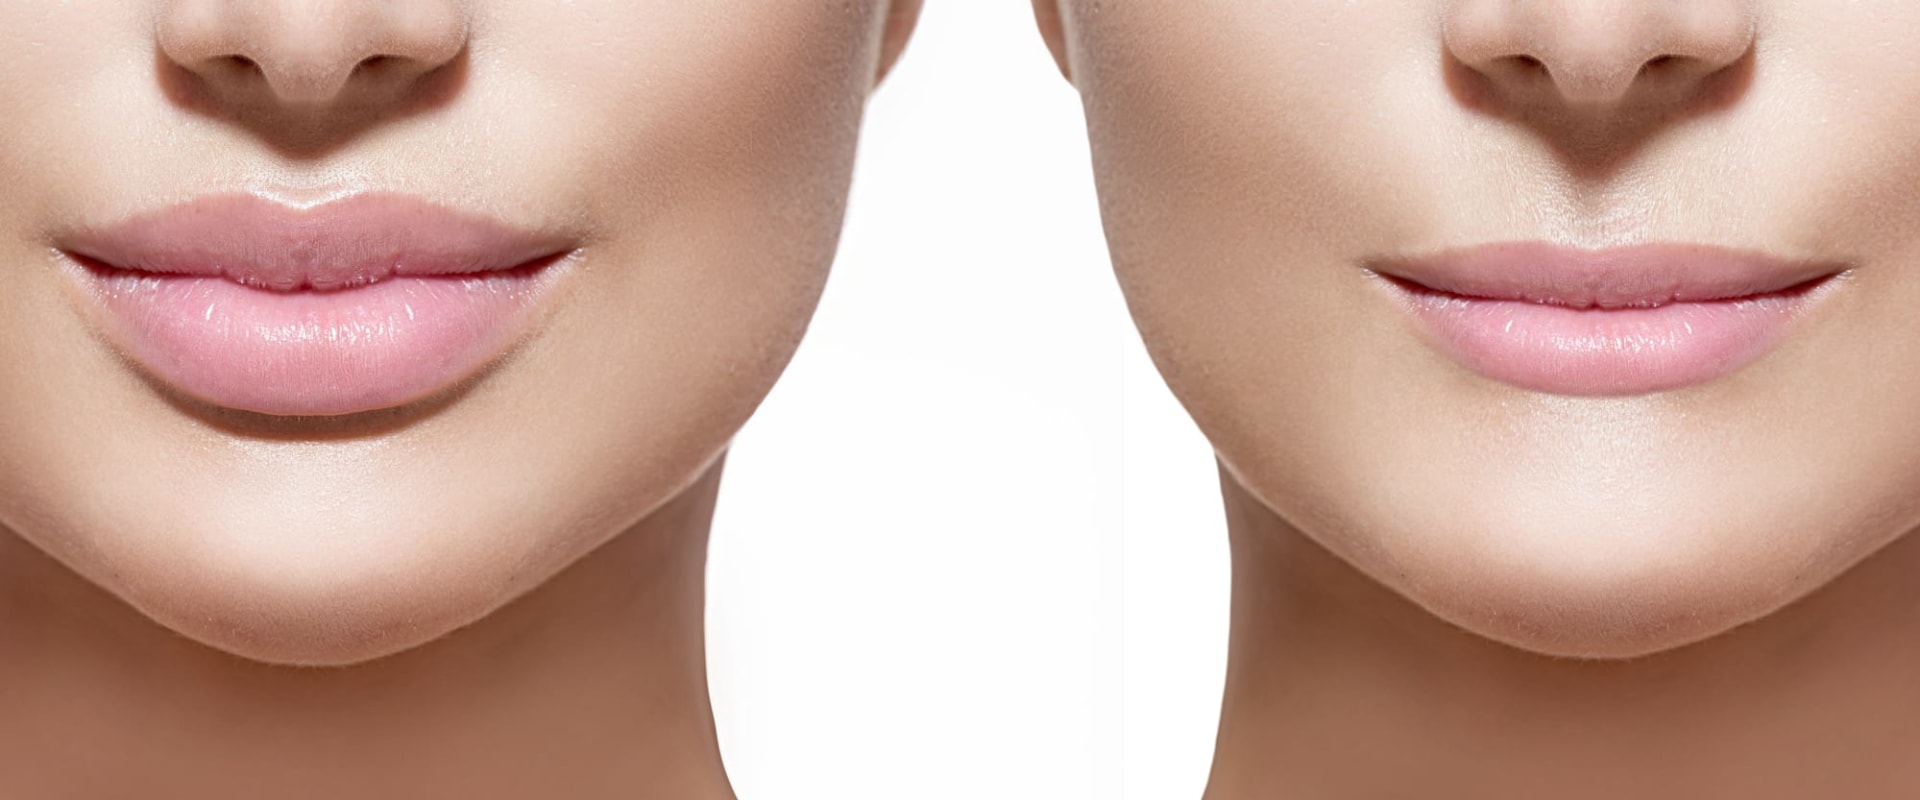 Juvederm how long does it last?